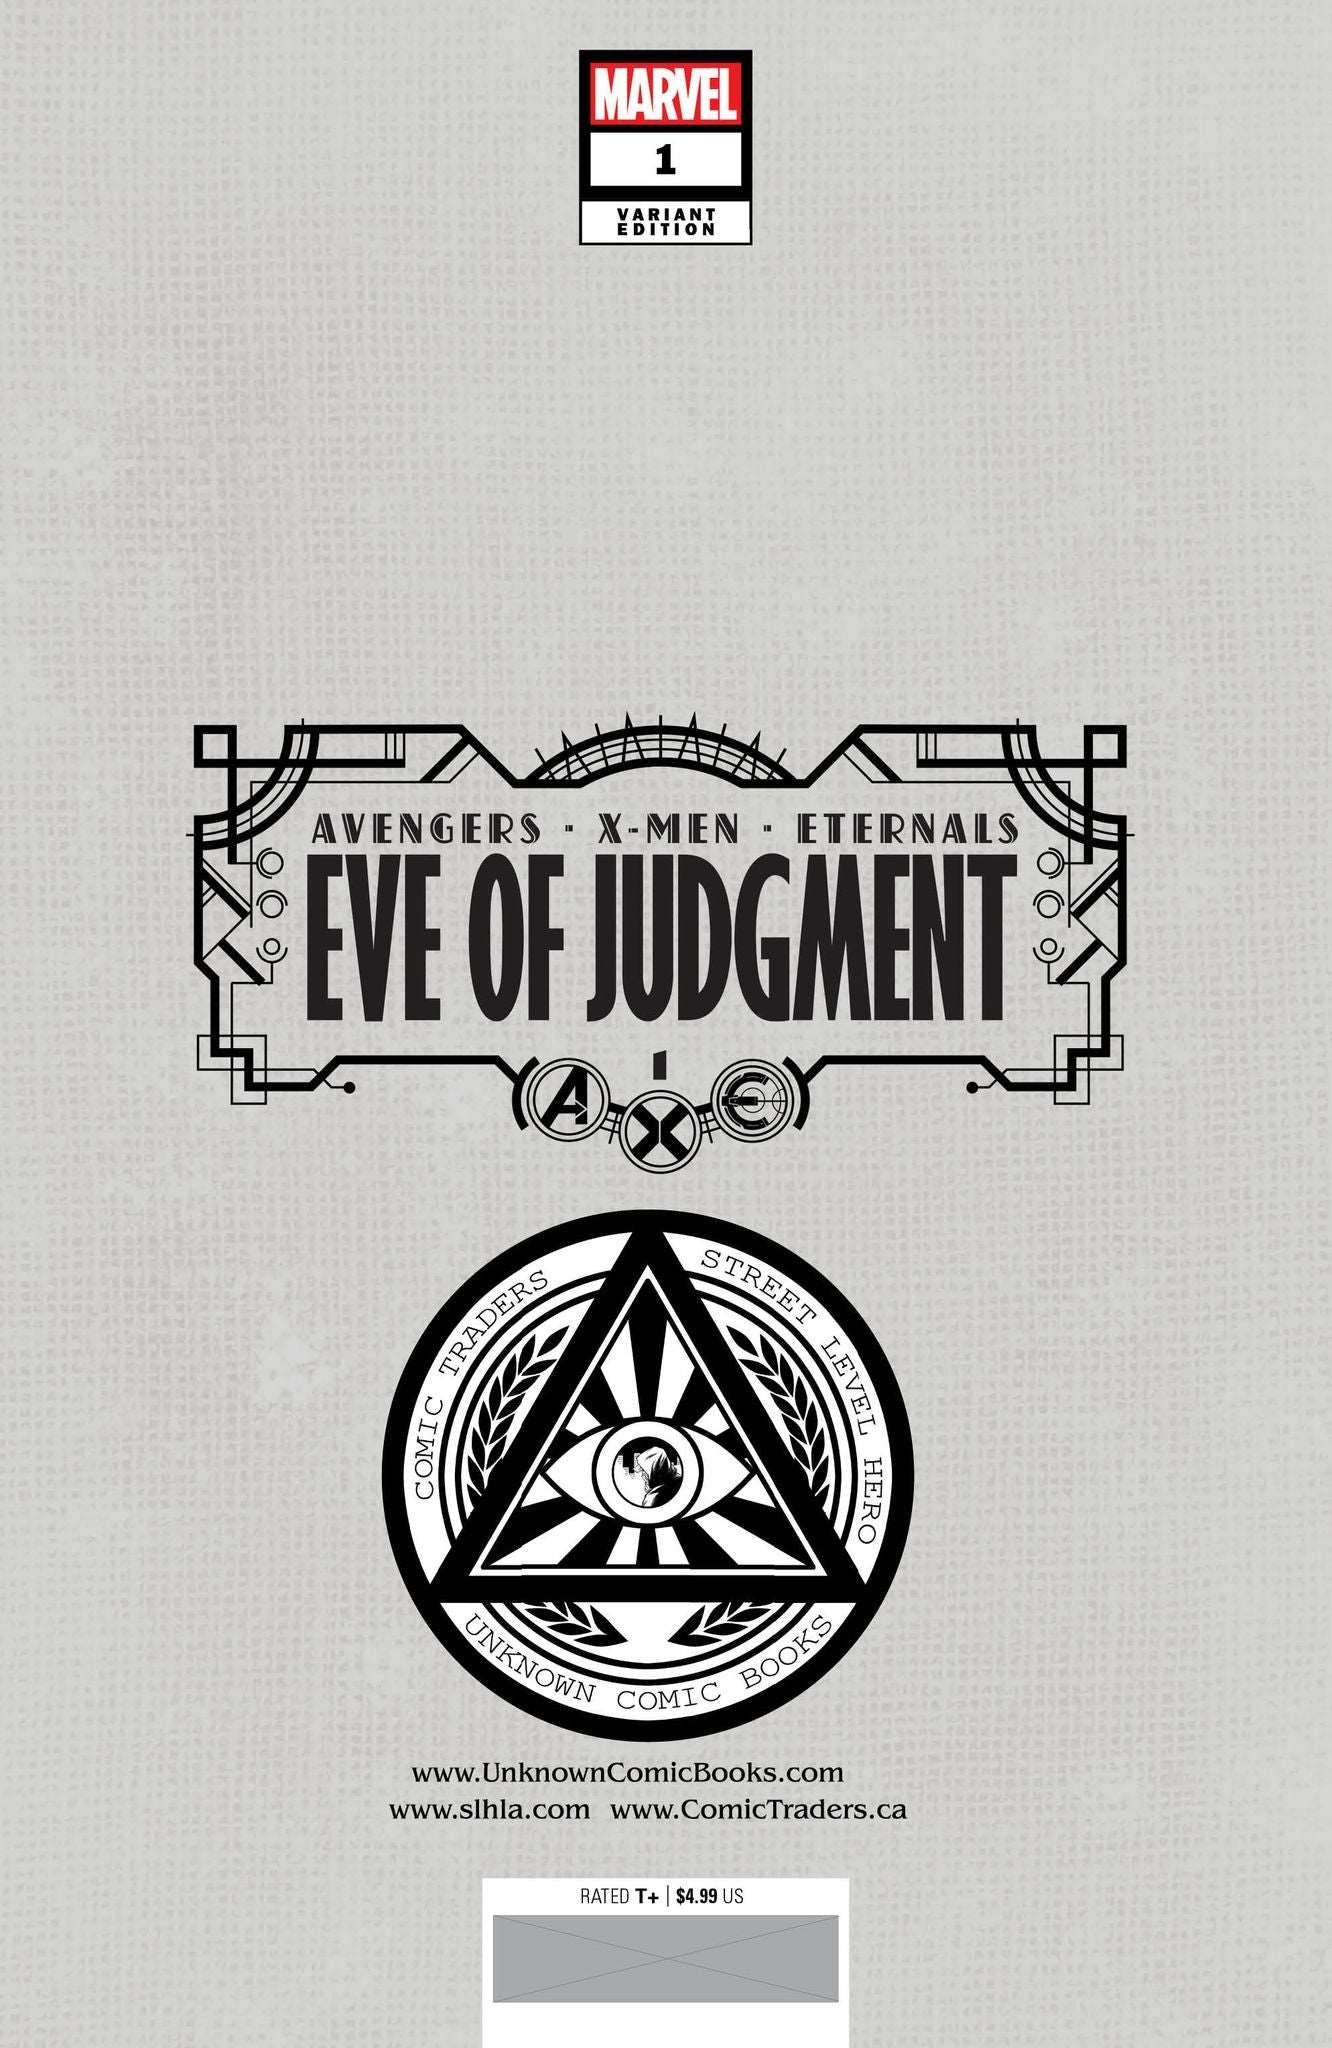 A.X.E.: EVE OF JUDGMENT #1 [AXE] UNKNOWN COMICS DAVID NAKAYAMA HELLFIRE EXCLUSIVE VIRGIN VAR (07/13/2022) **Item(s) may be a preorder and will not ship until or after the street date posted in the title.** A.X.E.: EVE OF JUDGMENT 1 [AXE]MARVEL PRH(W) Kier